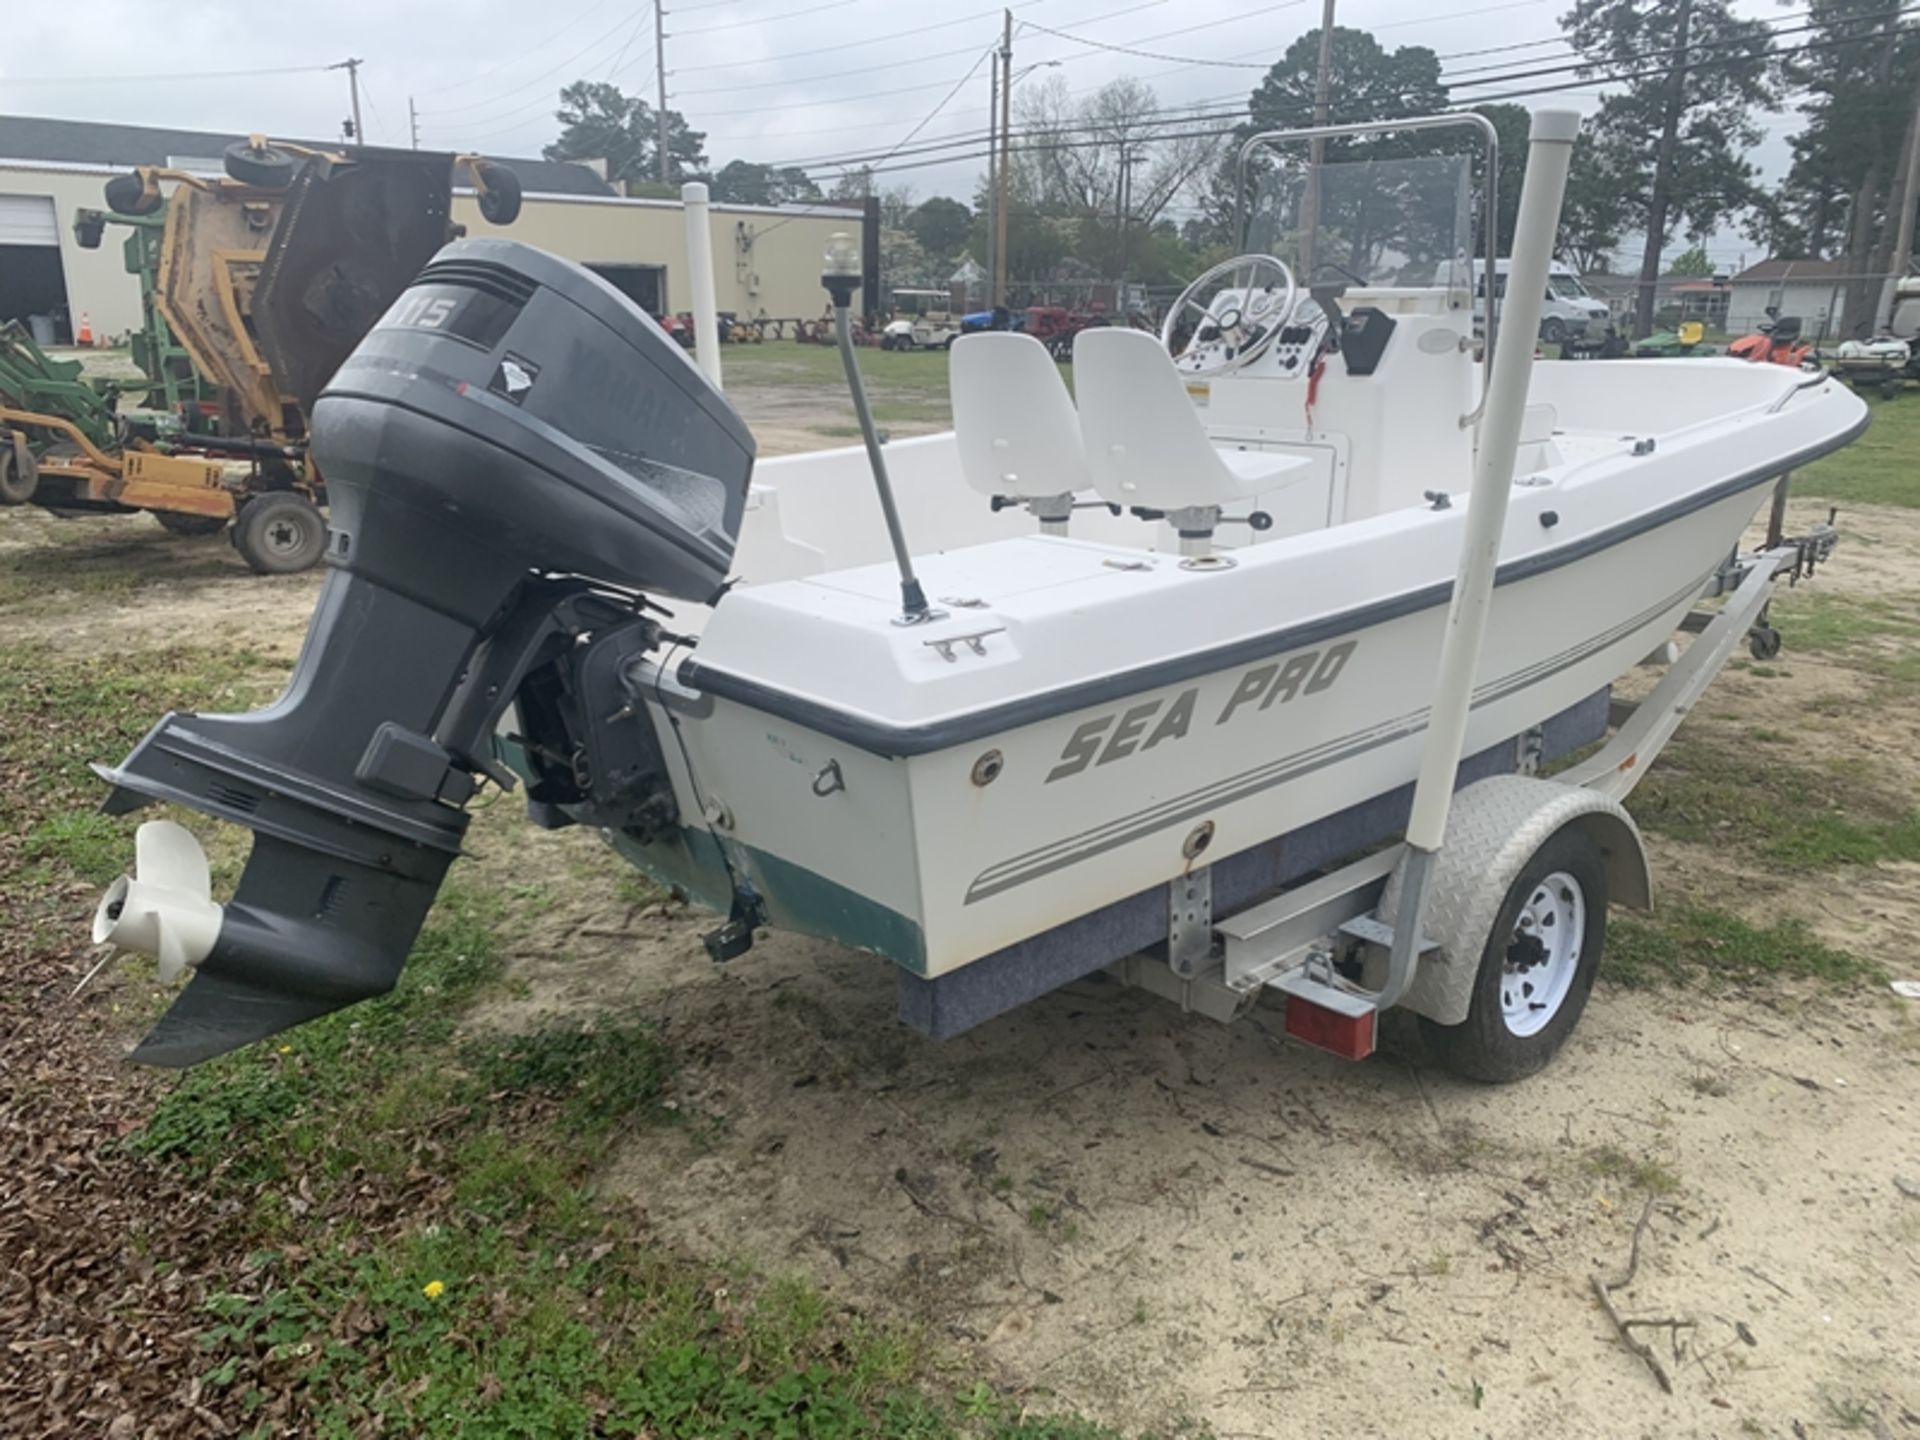 2003 SEA PRO 170 17' fiberglass center console with Yamaha 115 and trailer - HULL ID - PIOLB978K203 - Image 3 of 9